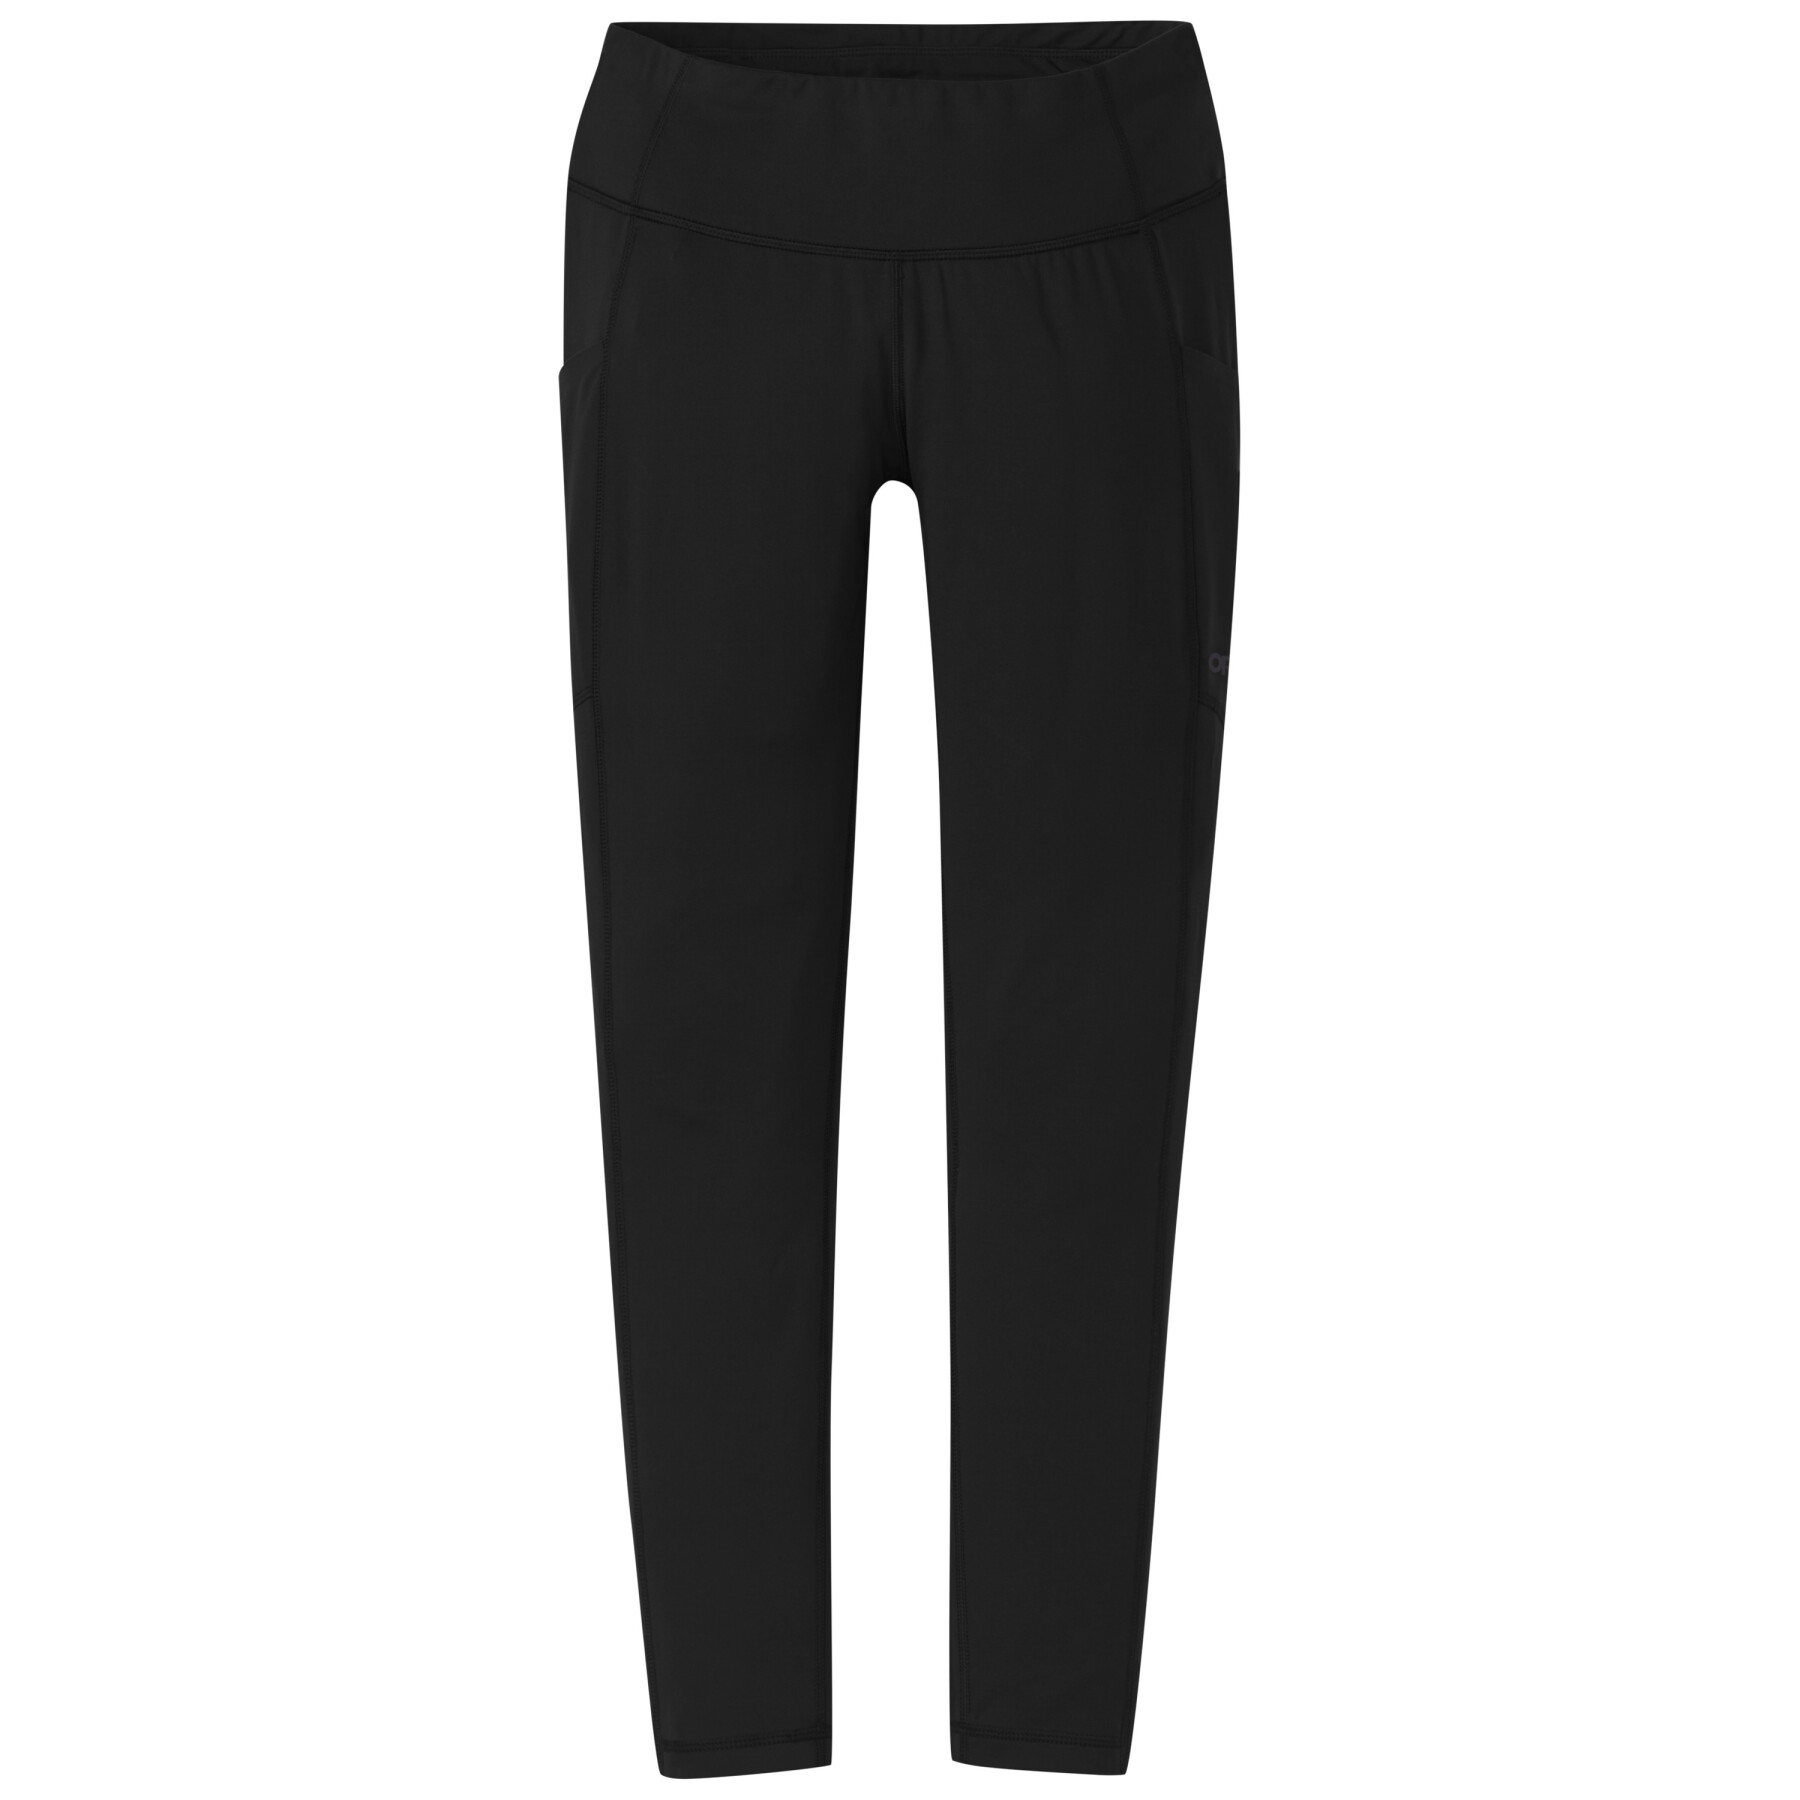 Women's 7/8 leggings Outdoor Research Melody Plus